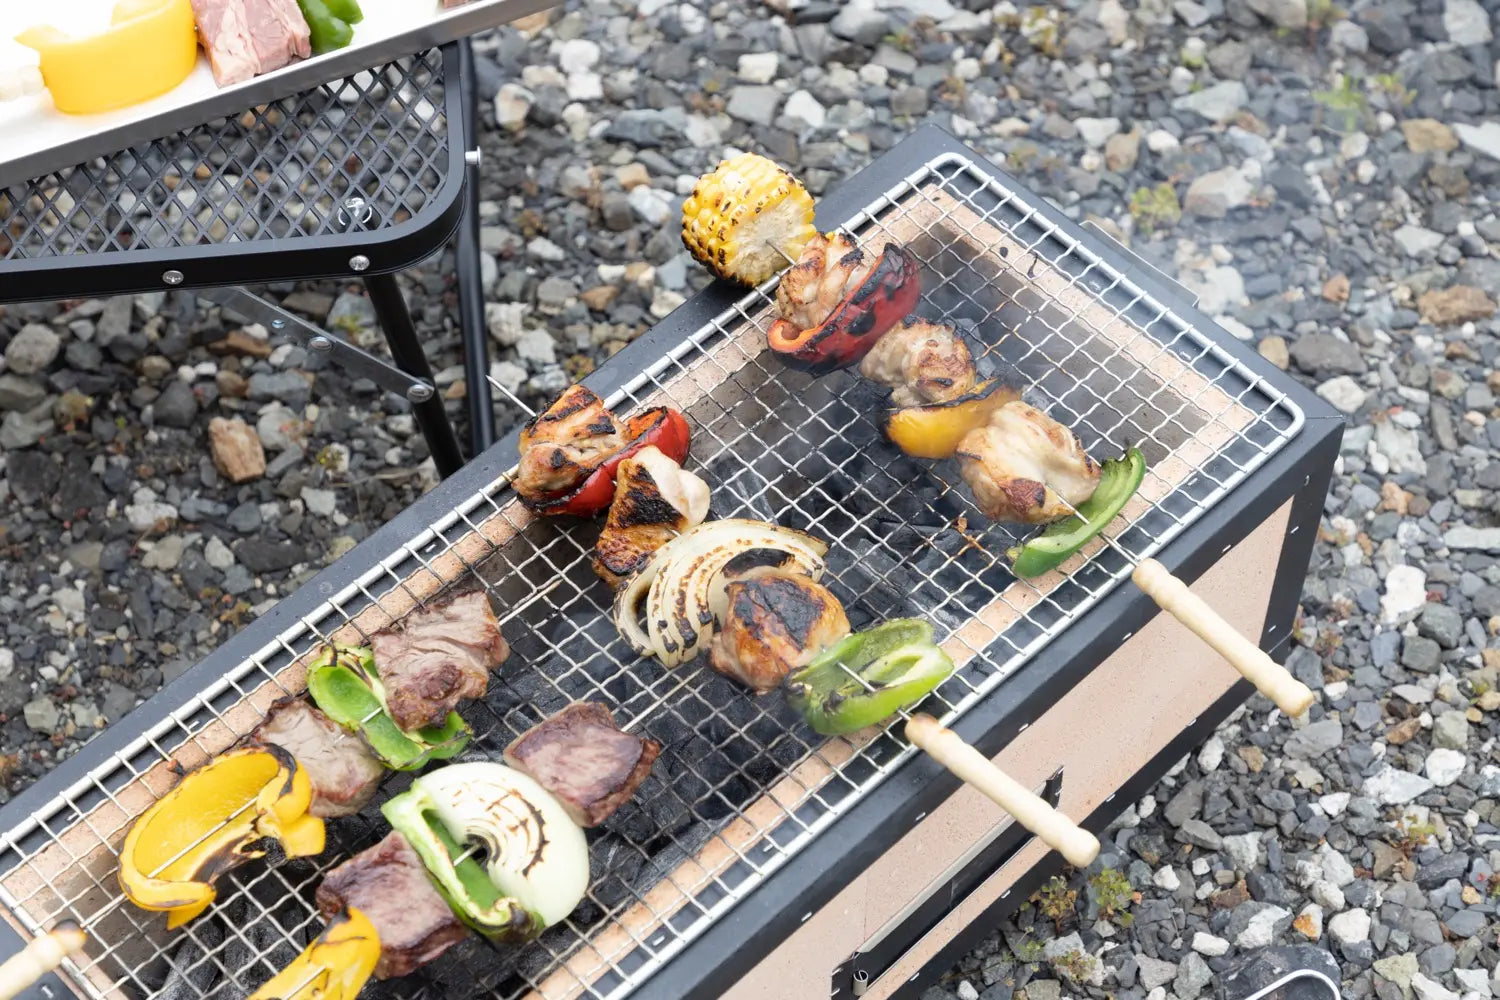 Four kebabs on a Kaginushi grill